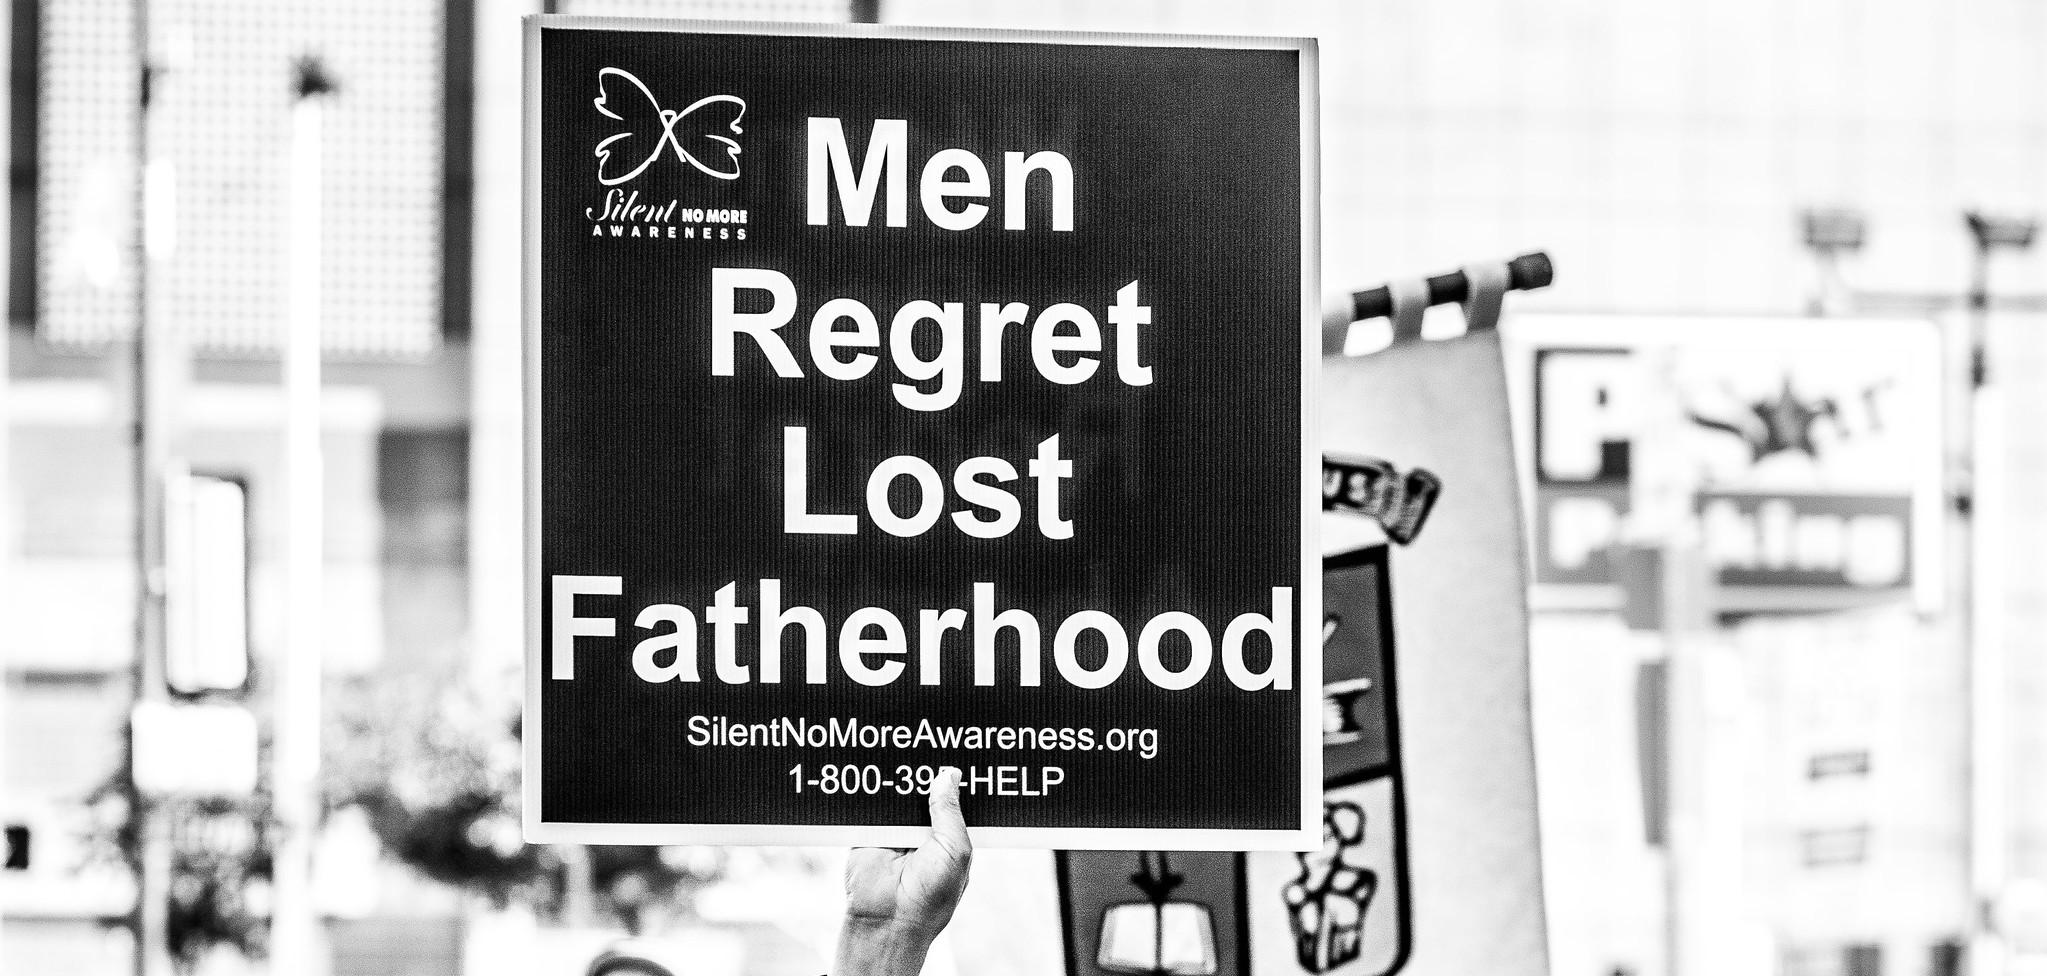 A man wearing sunglasses holding a sign that says "Men Regret Lost Fatherhood"